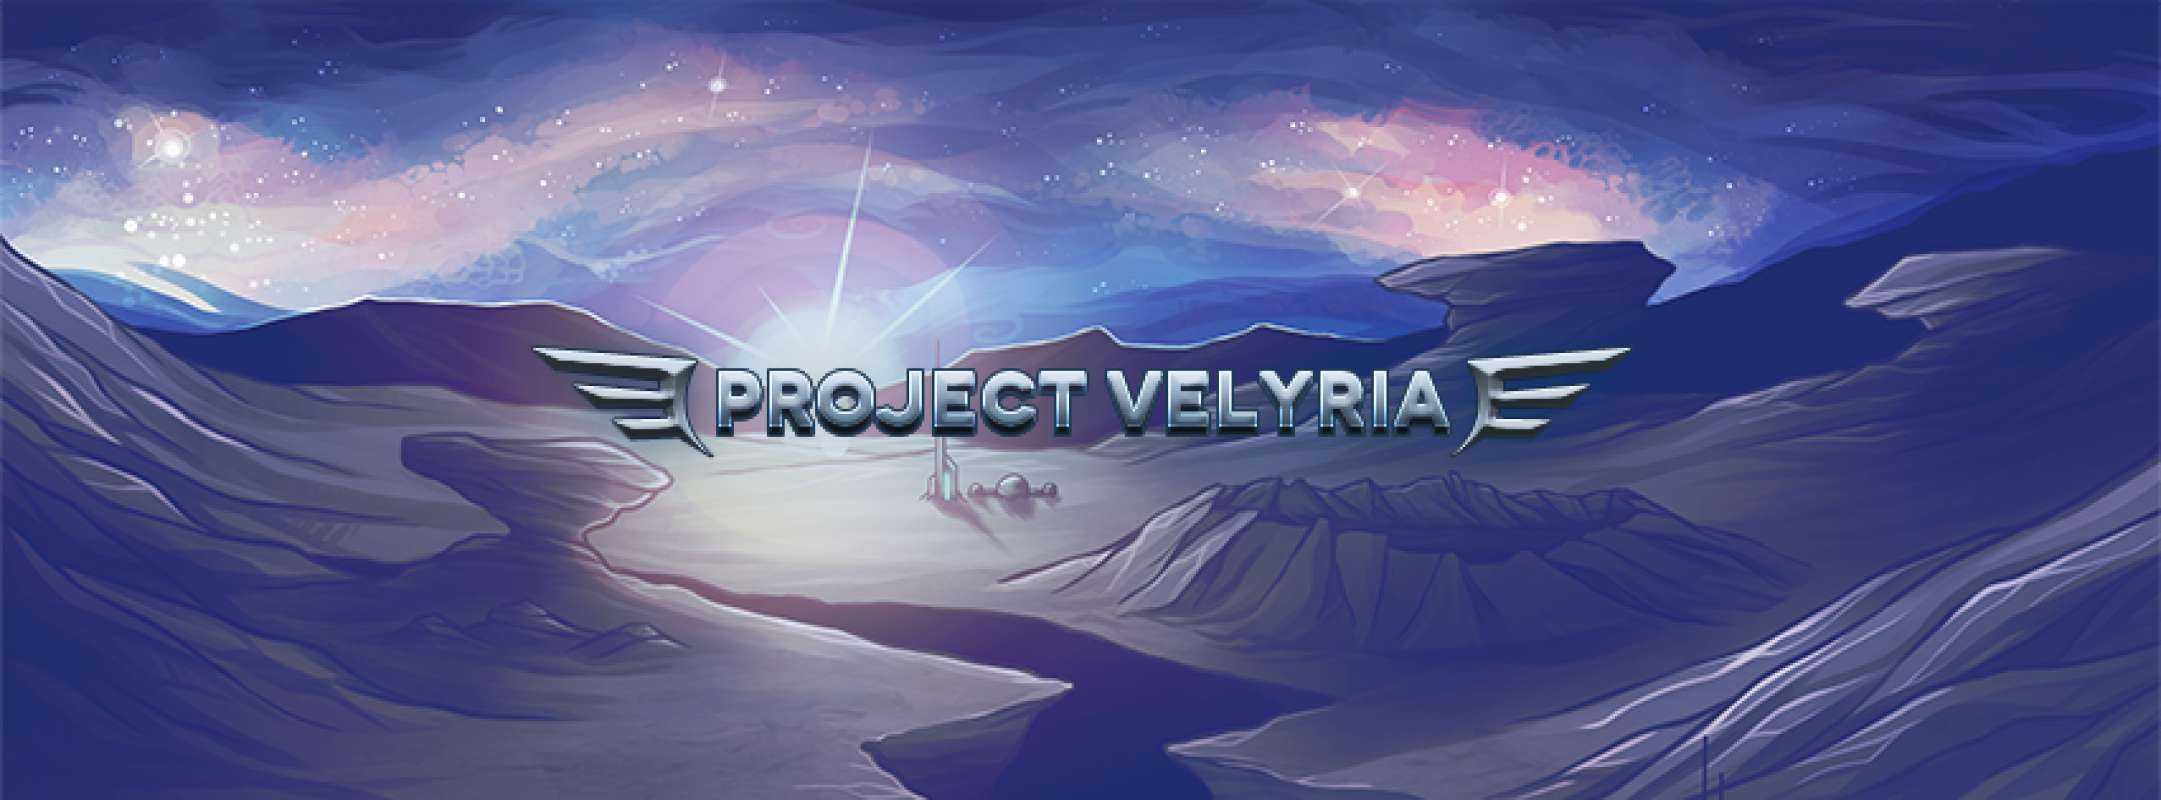 Project: Valyria